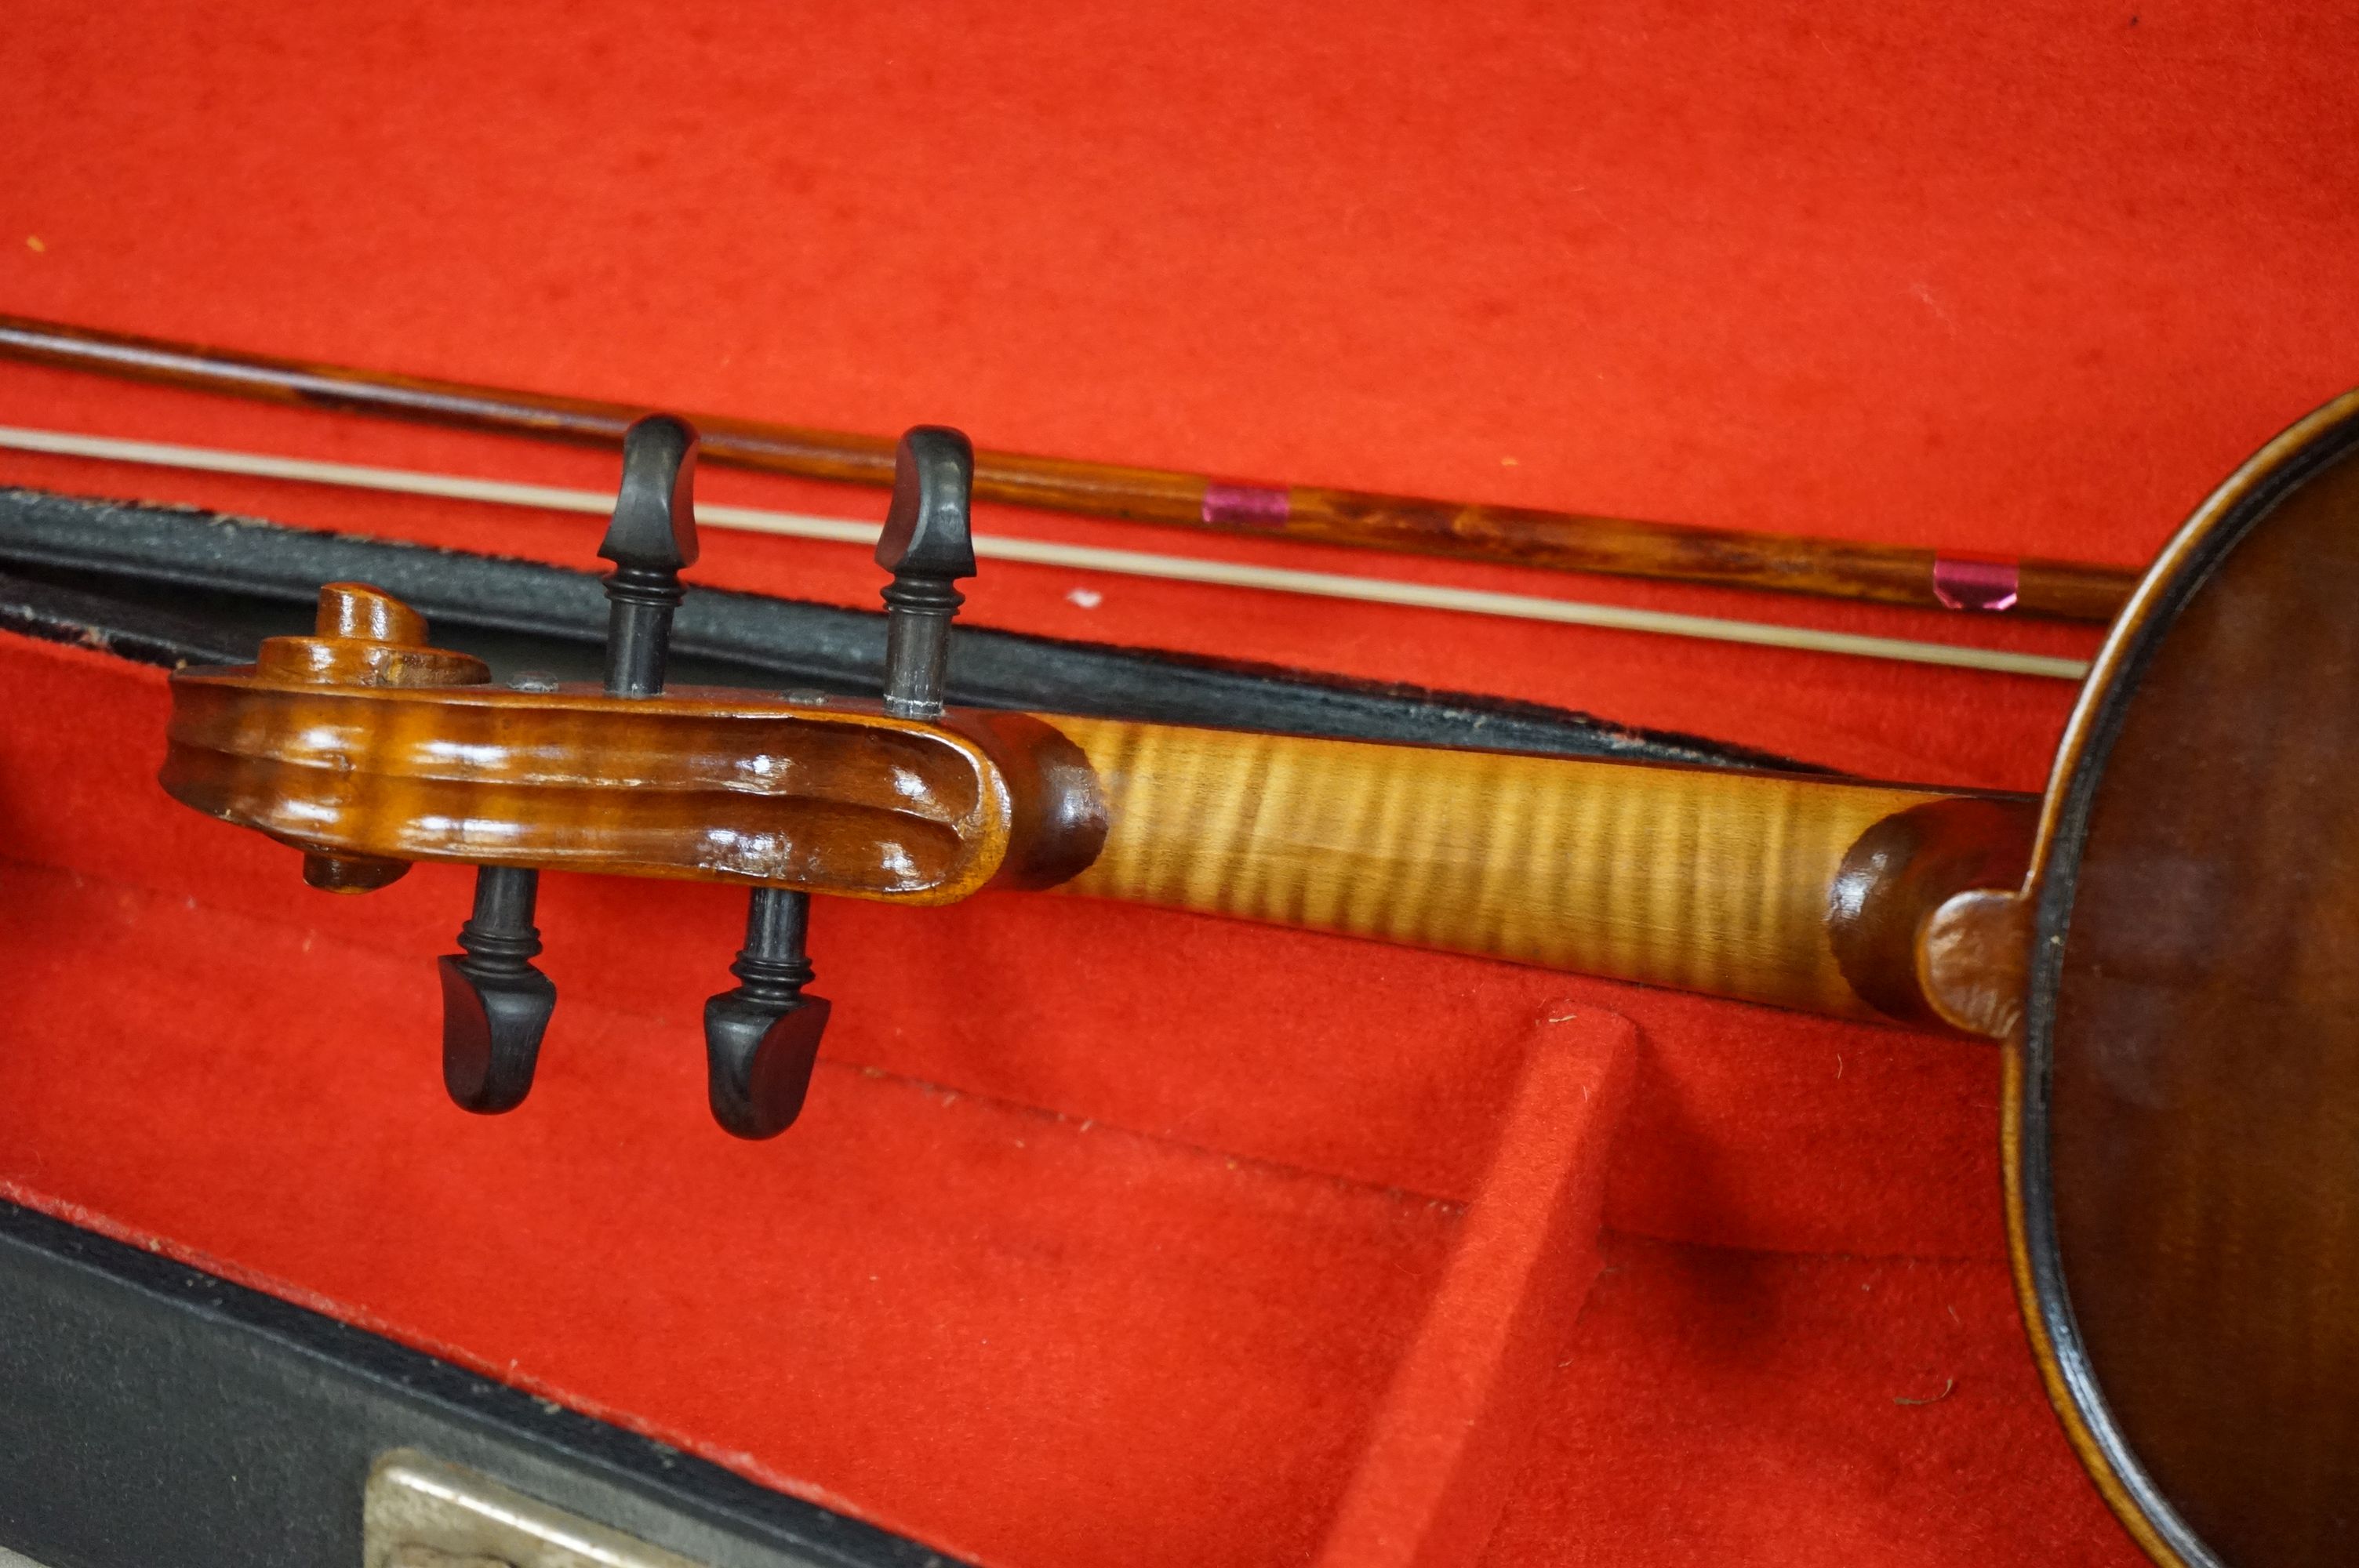 A violin and bow together with hardcase, import label for Boosey & Hawkes to inside of violin. - Image 6 of 10